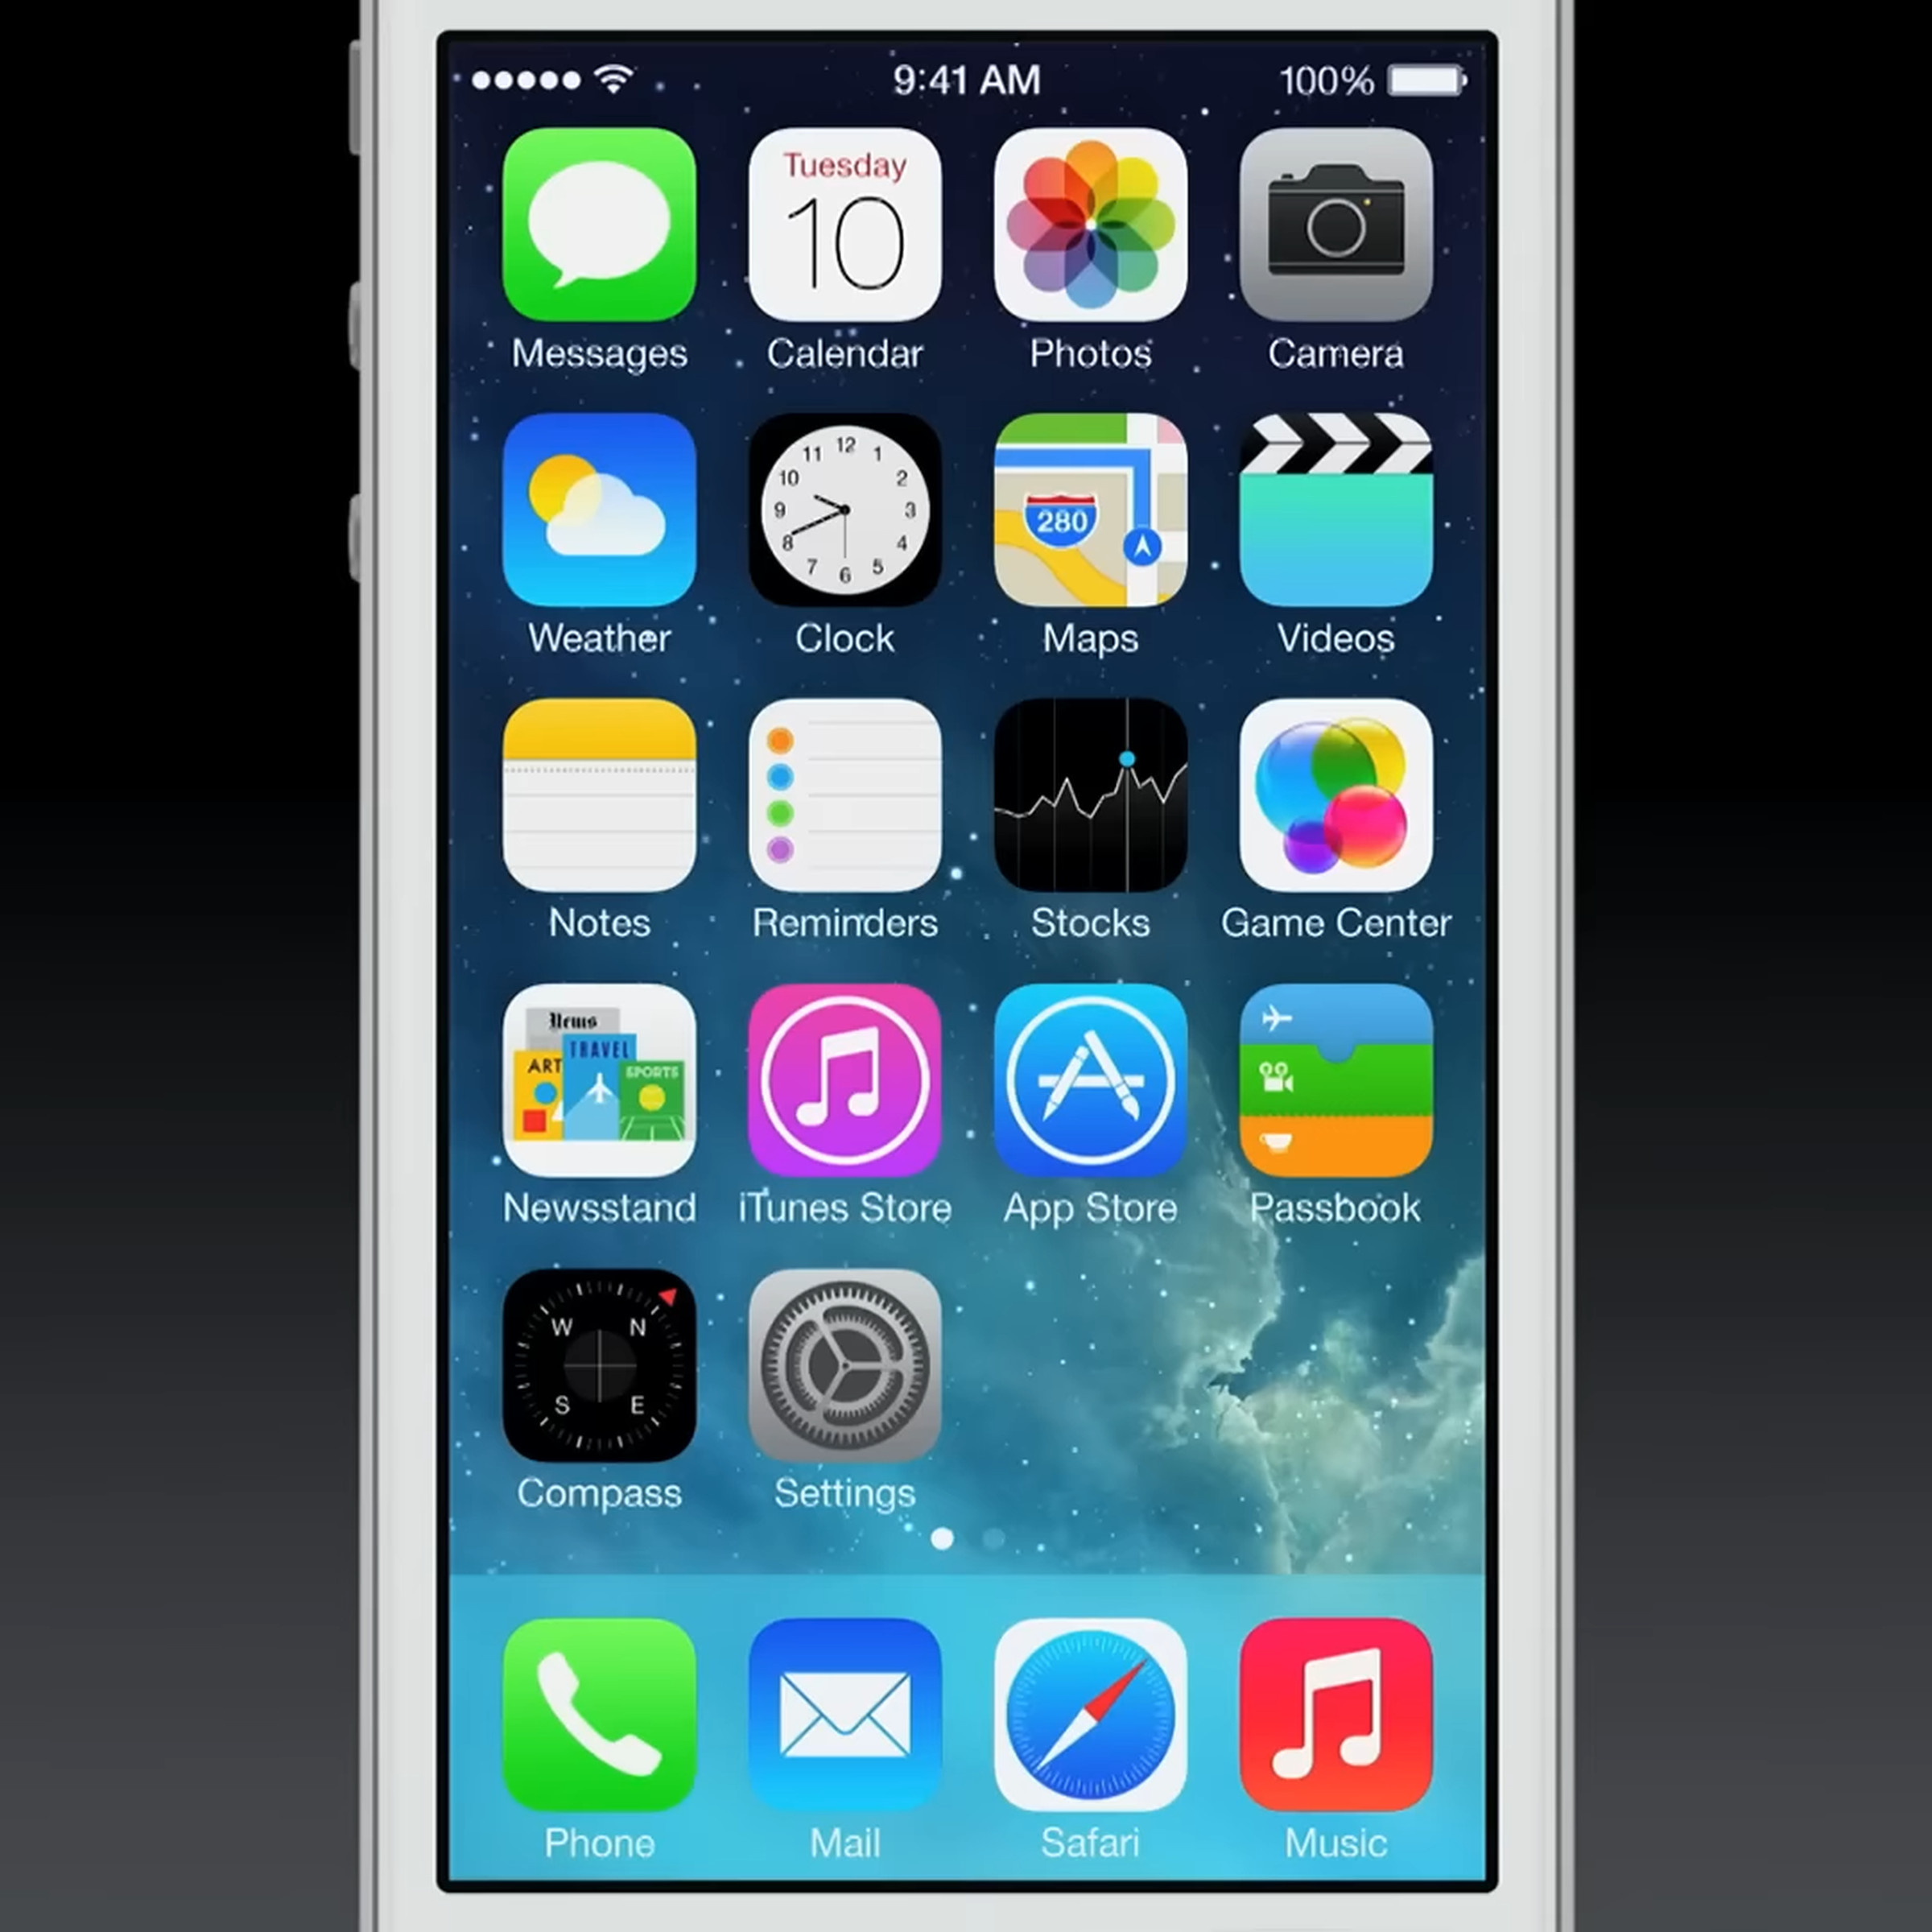 An image of iOS 7 from Apple’s September 2013 event.